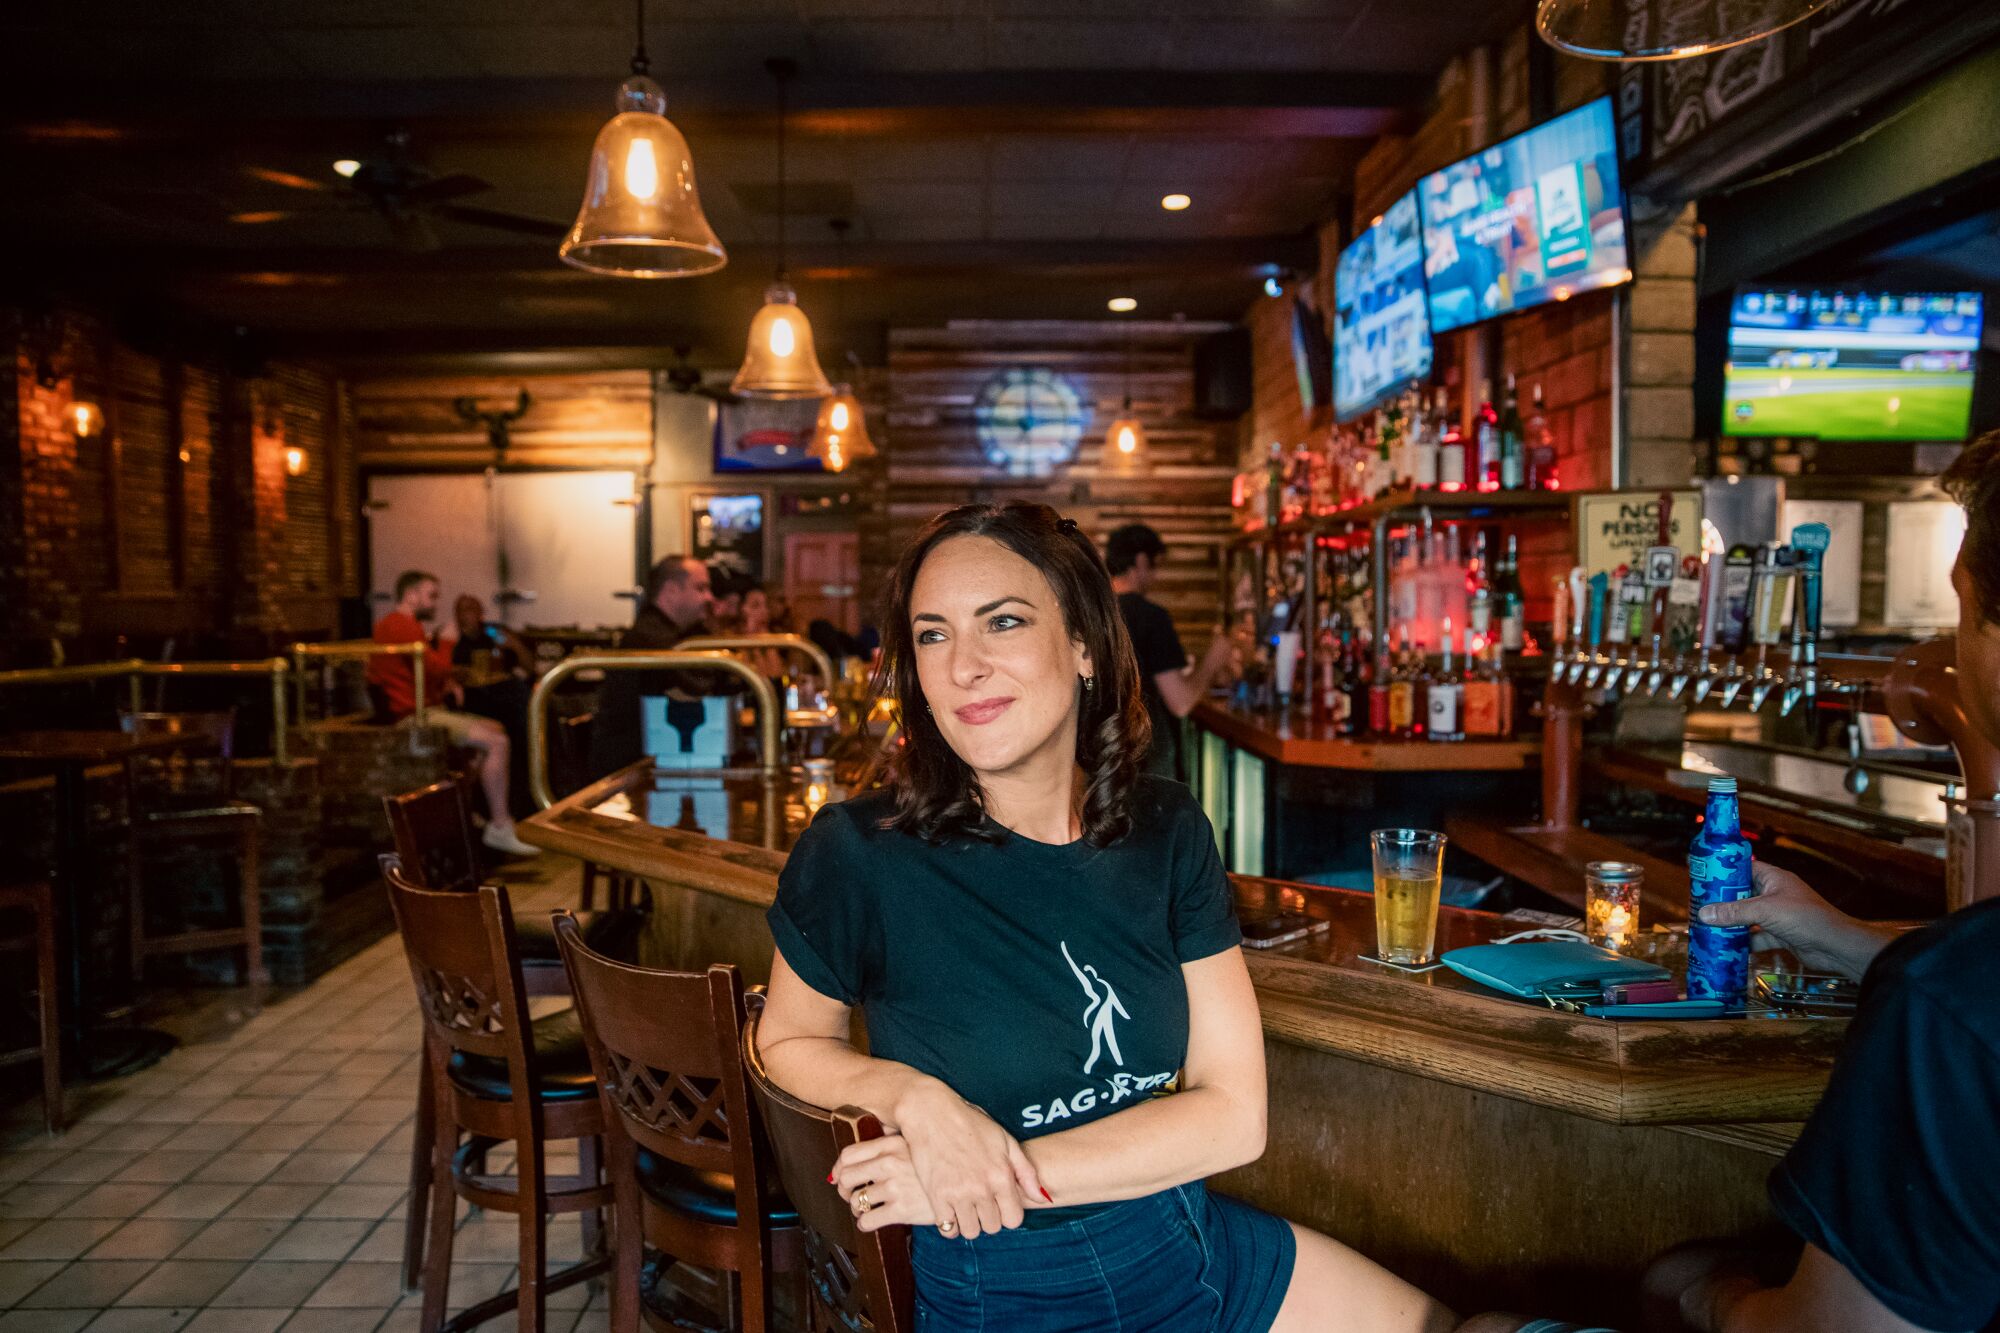 A woman sits in a bar setting.